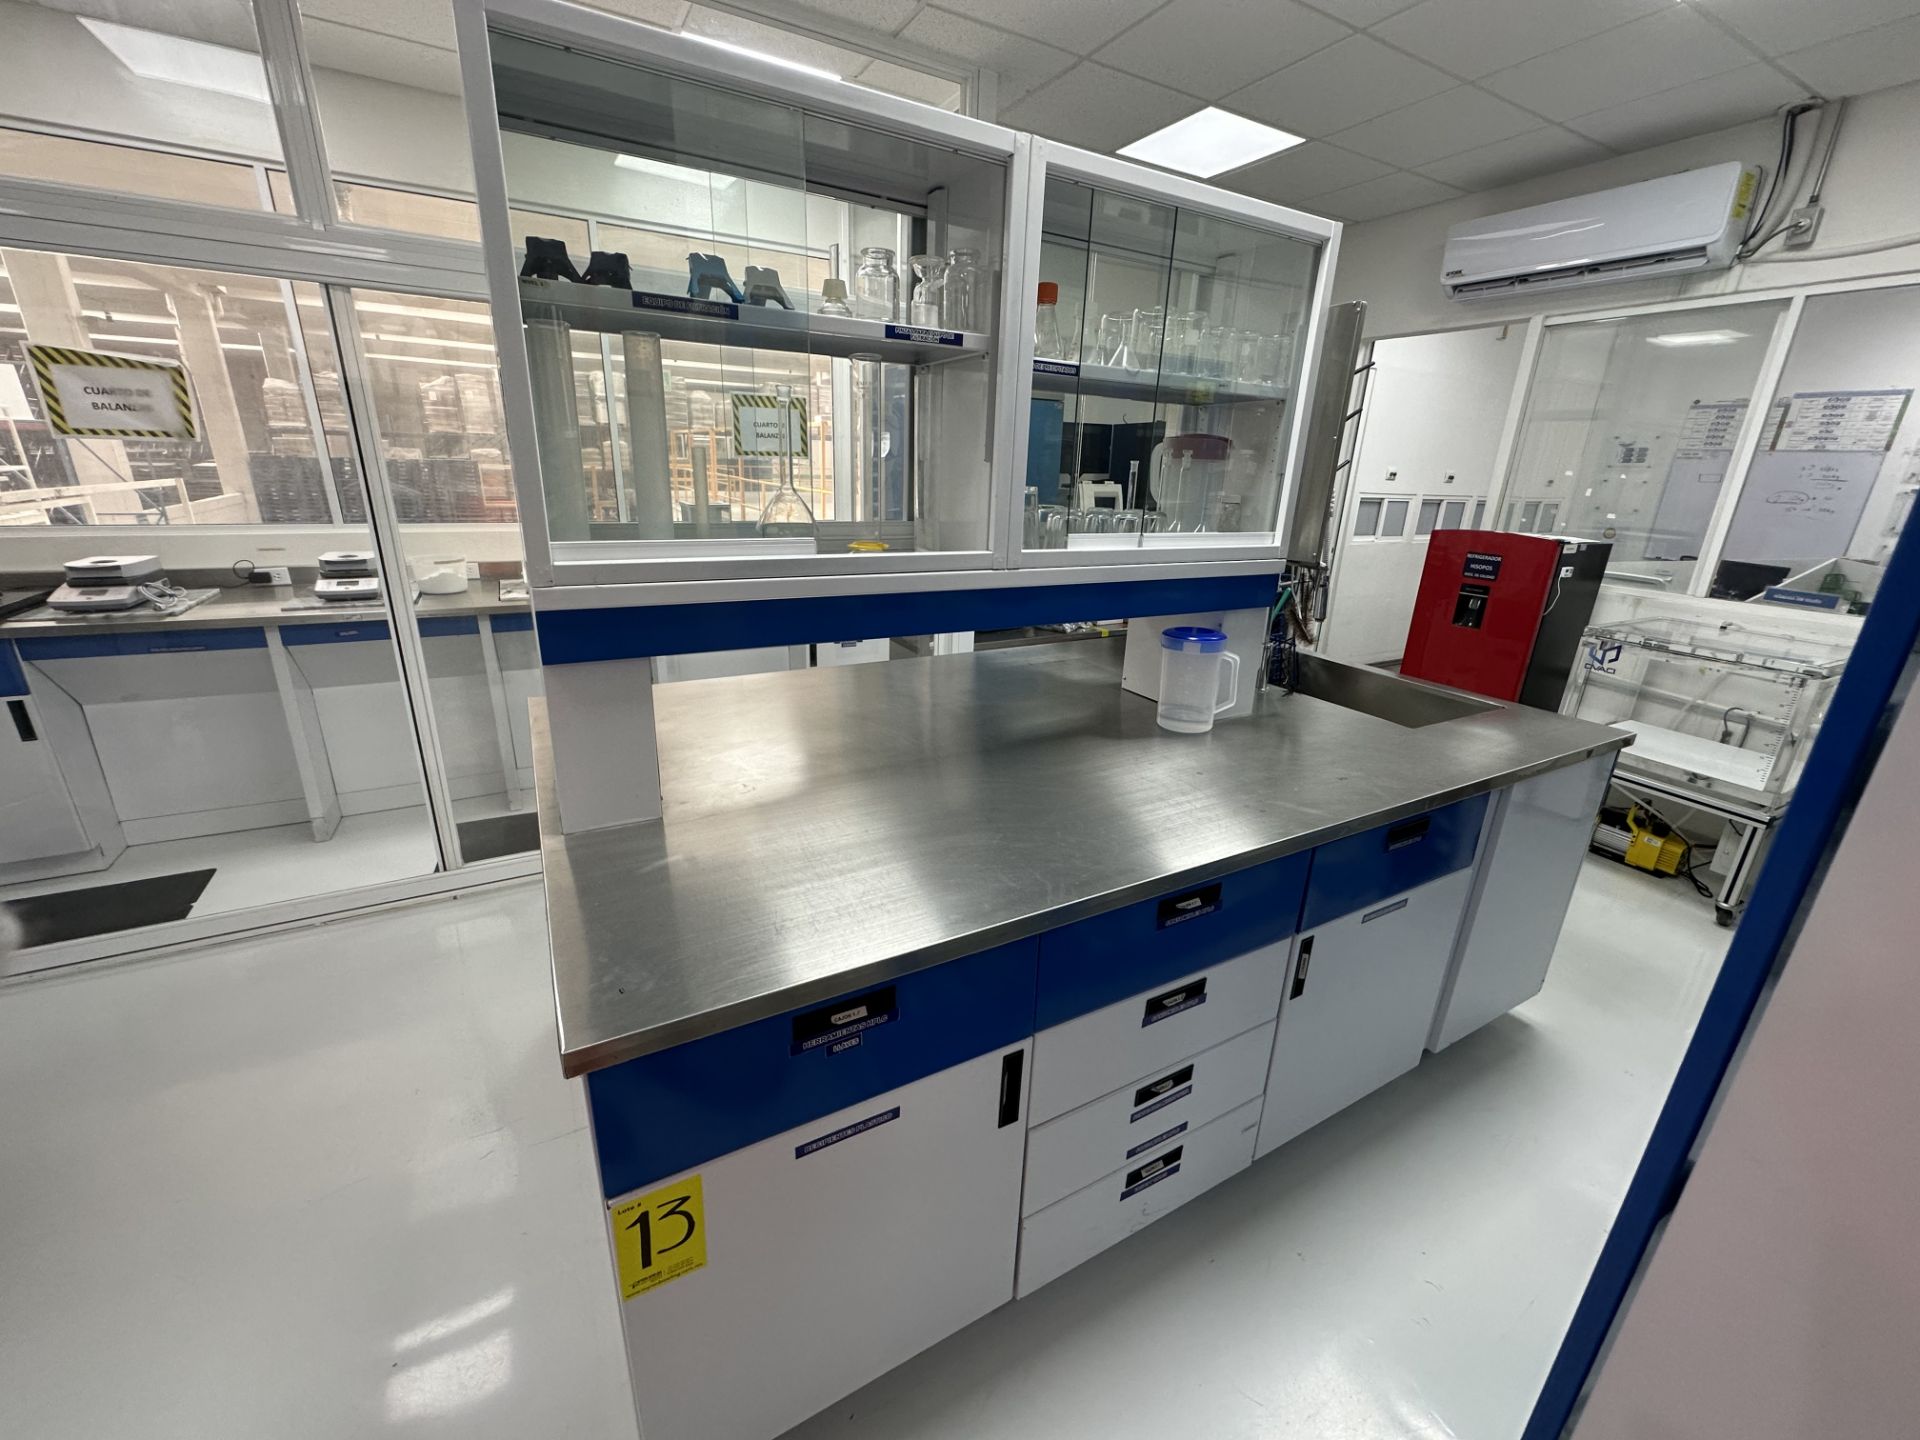 1 Central laboratory cabinet with stainless steel cover and sink, measures approximately 2.45 x 1.4